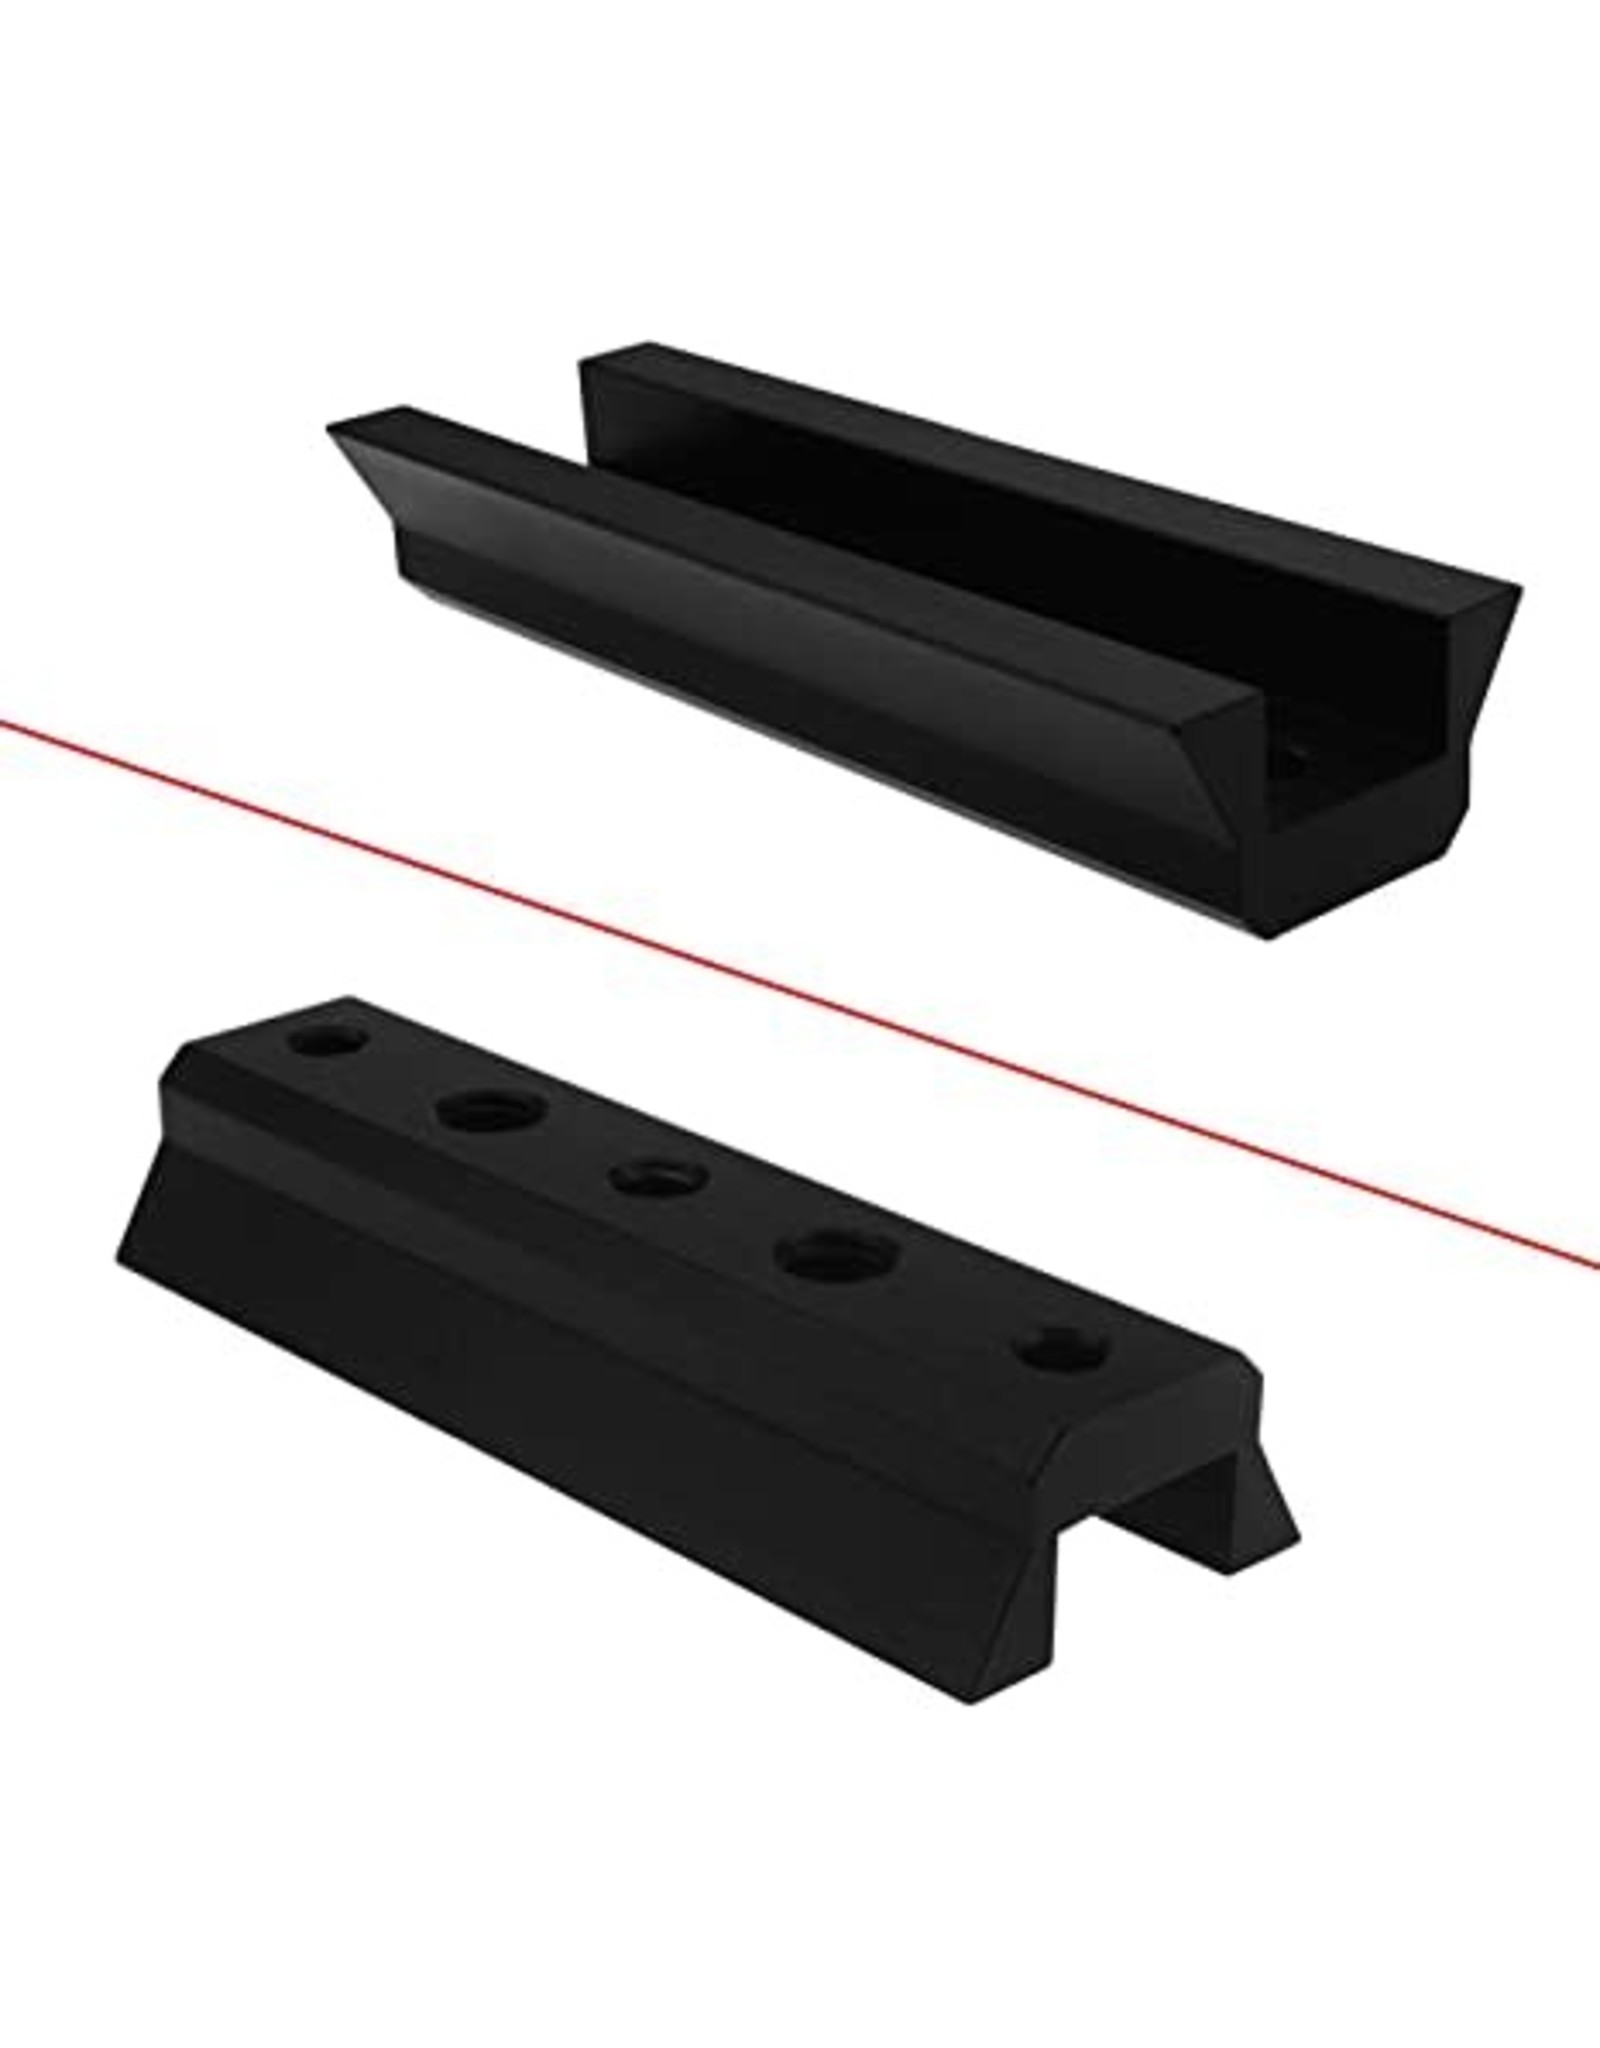 Synta Synta Dovetail Bar - fits The Dovetail mounting Base for finderscopes/guidescopes on most telescopes